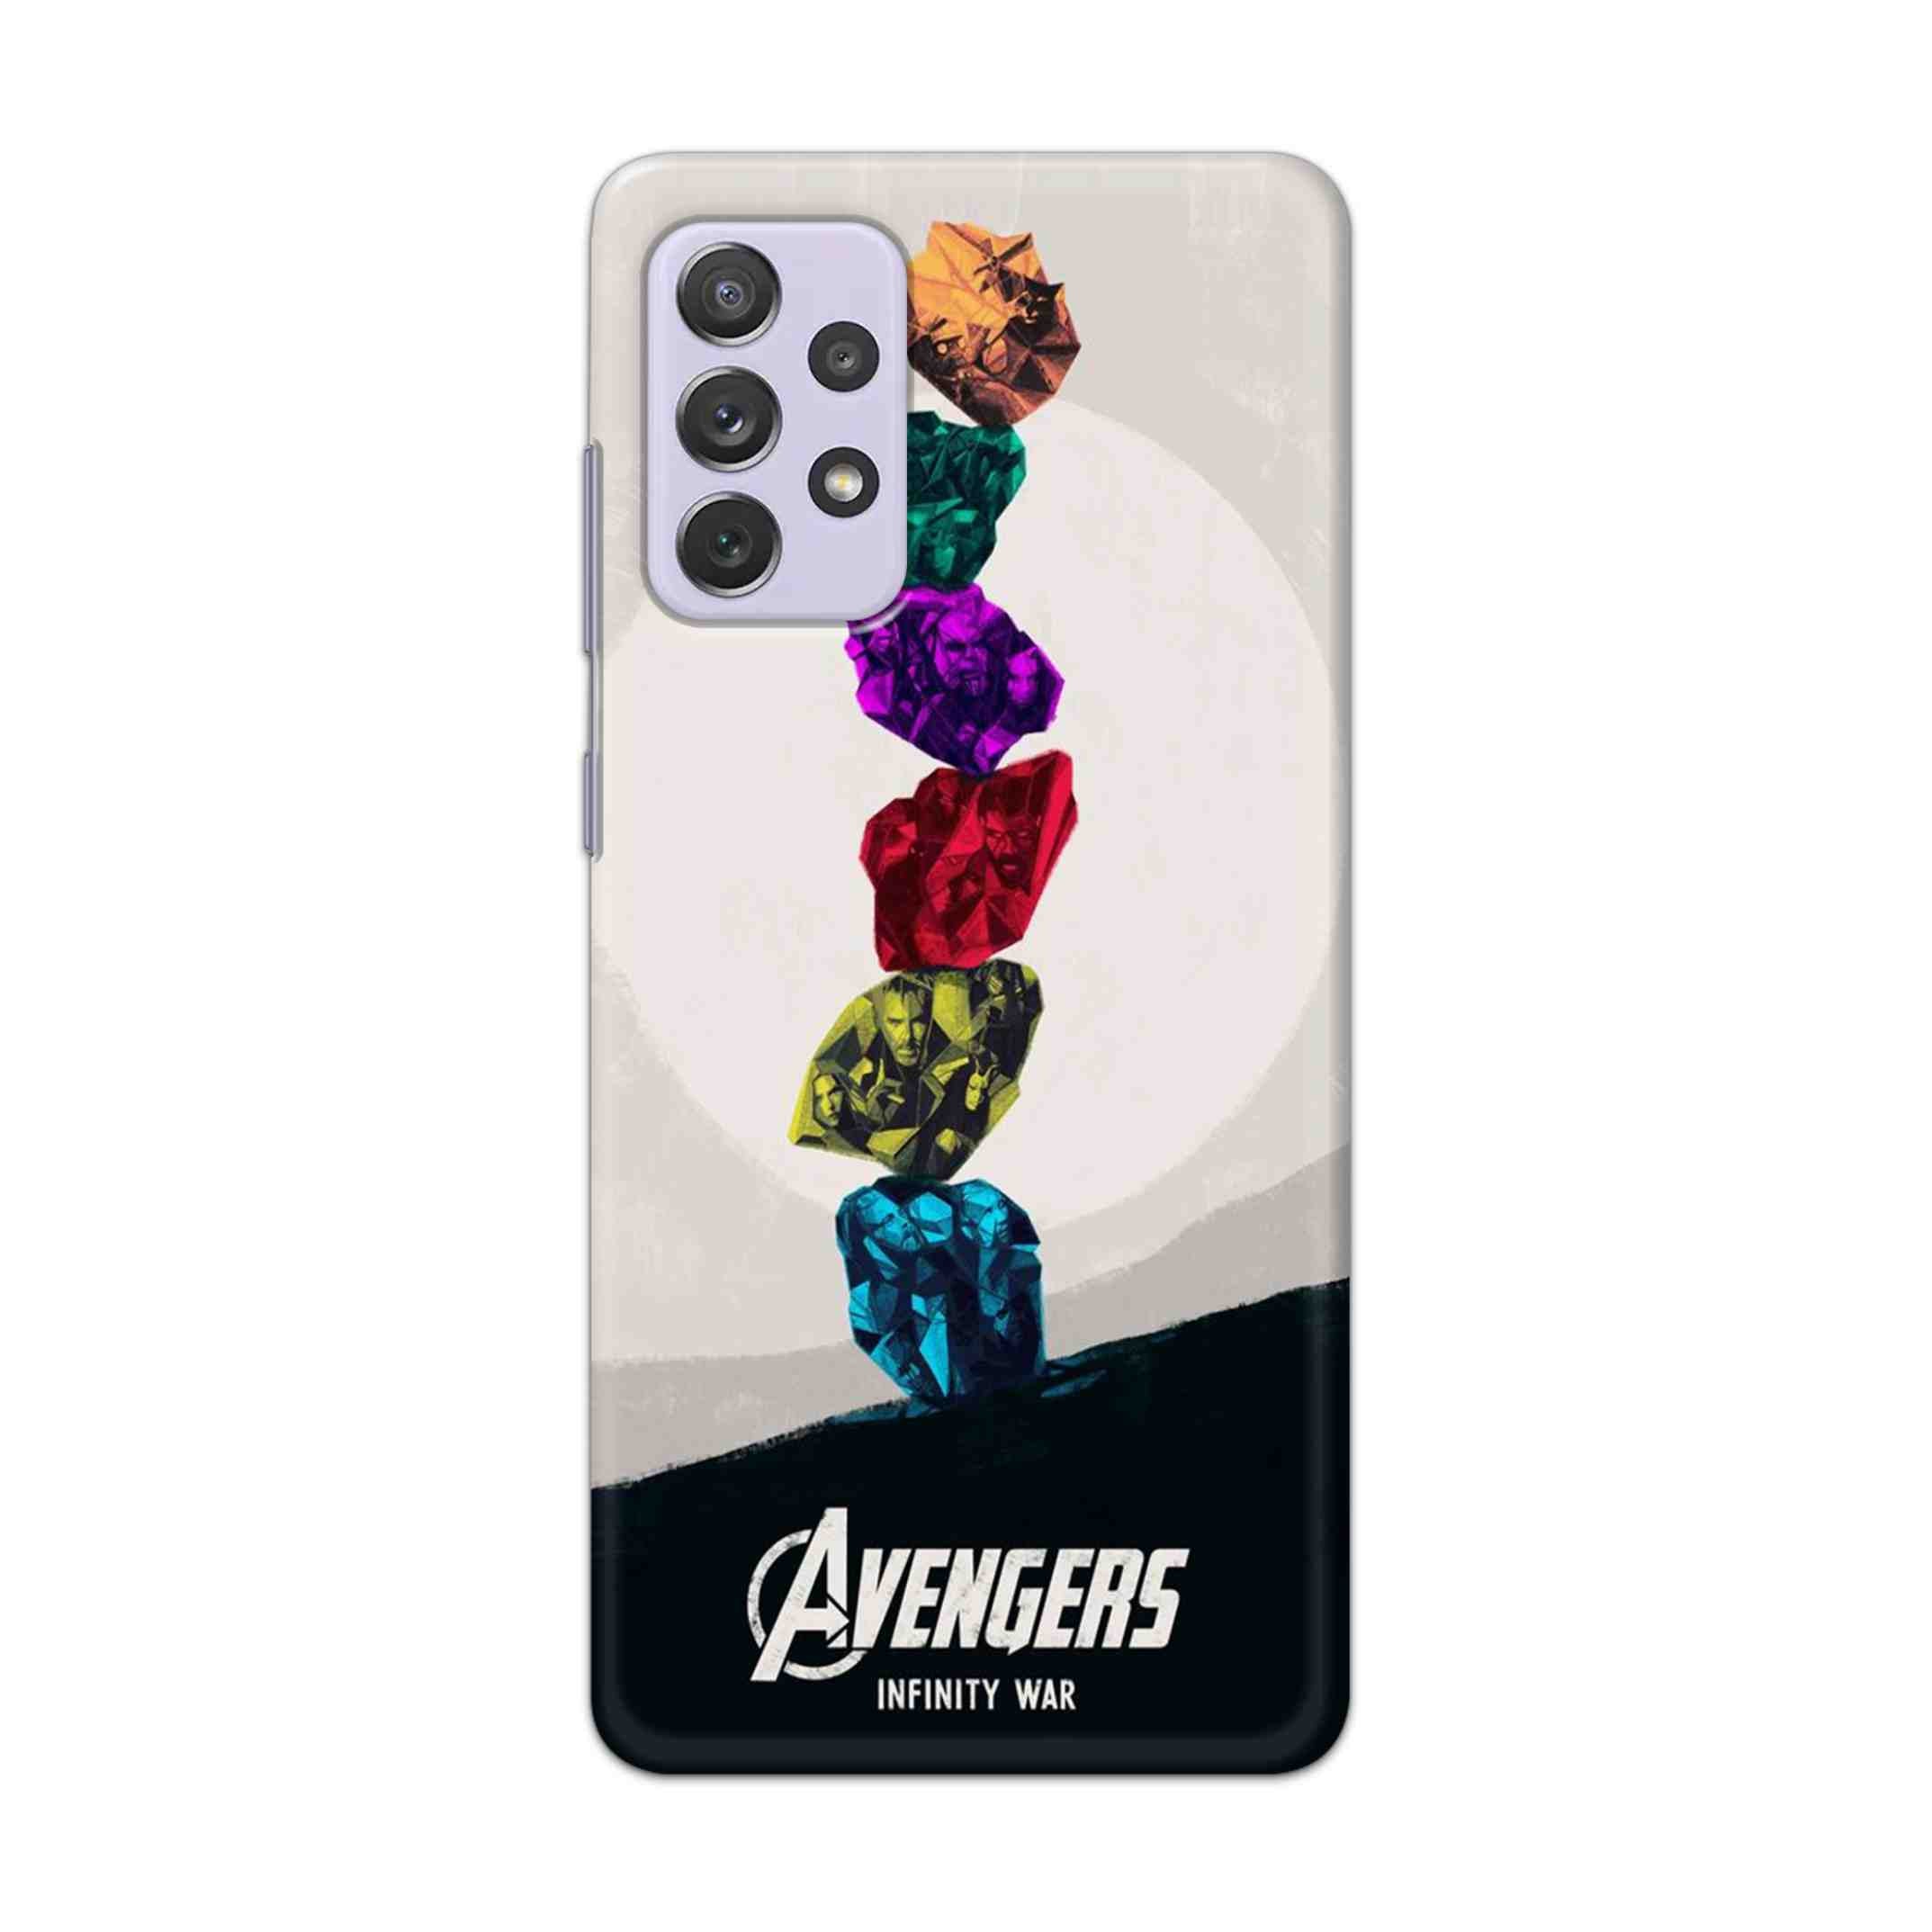 Buy Avengers Stone Hard Back Mobile Phone Case Cover For Samsung Galaxy A72 Online